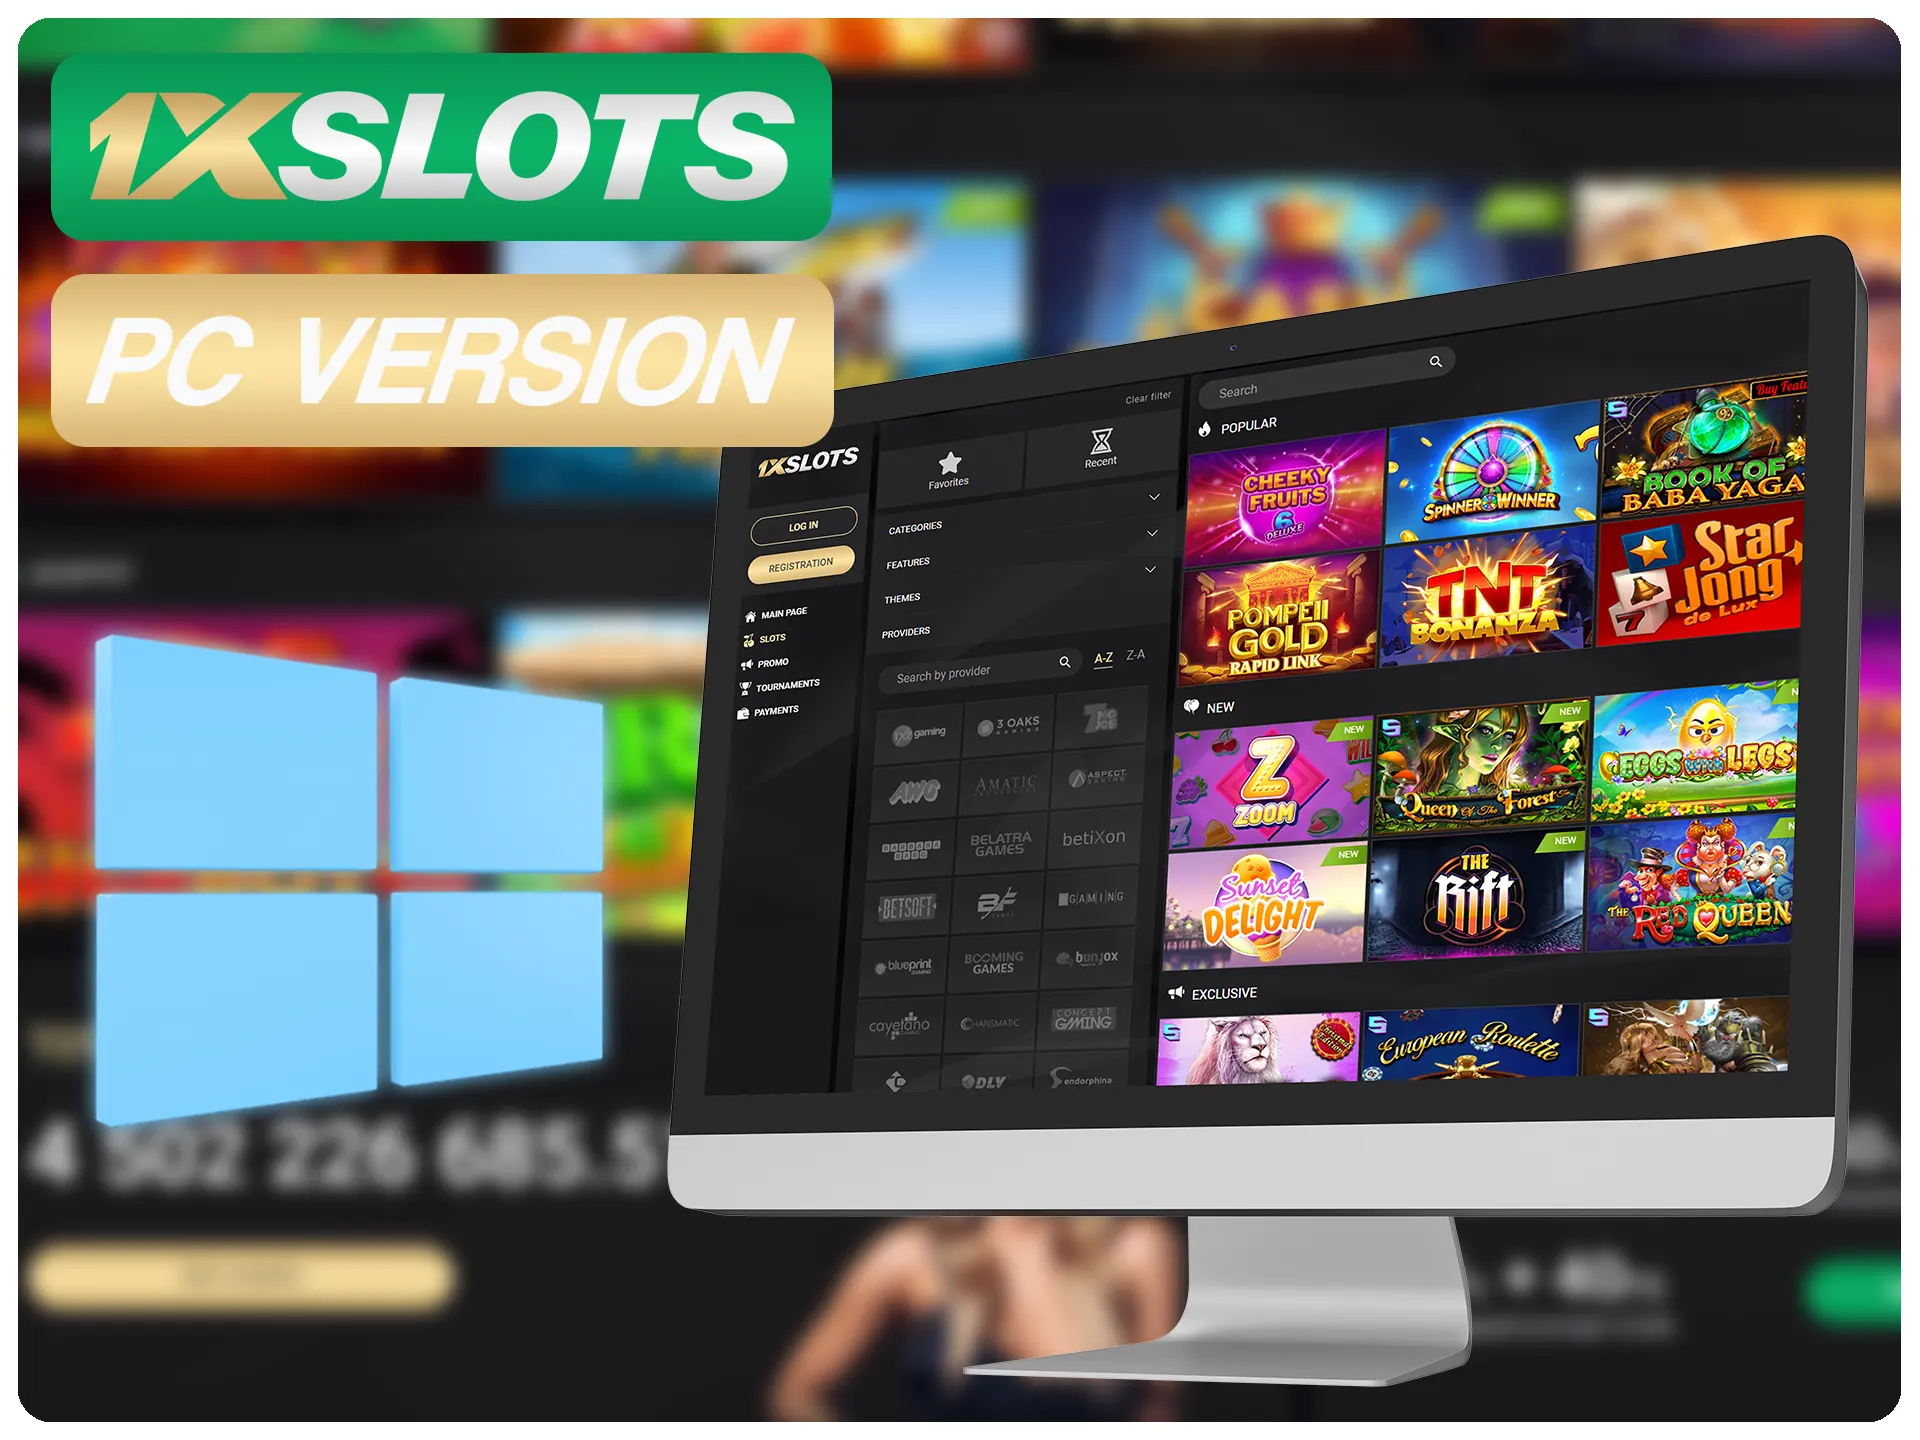 Use PC version of 1xSlots website on any computer.